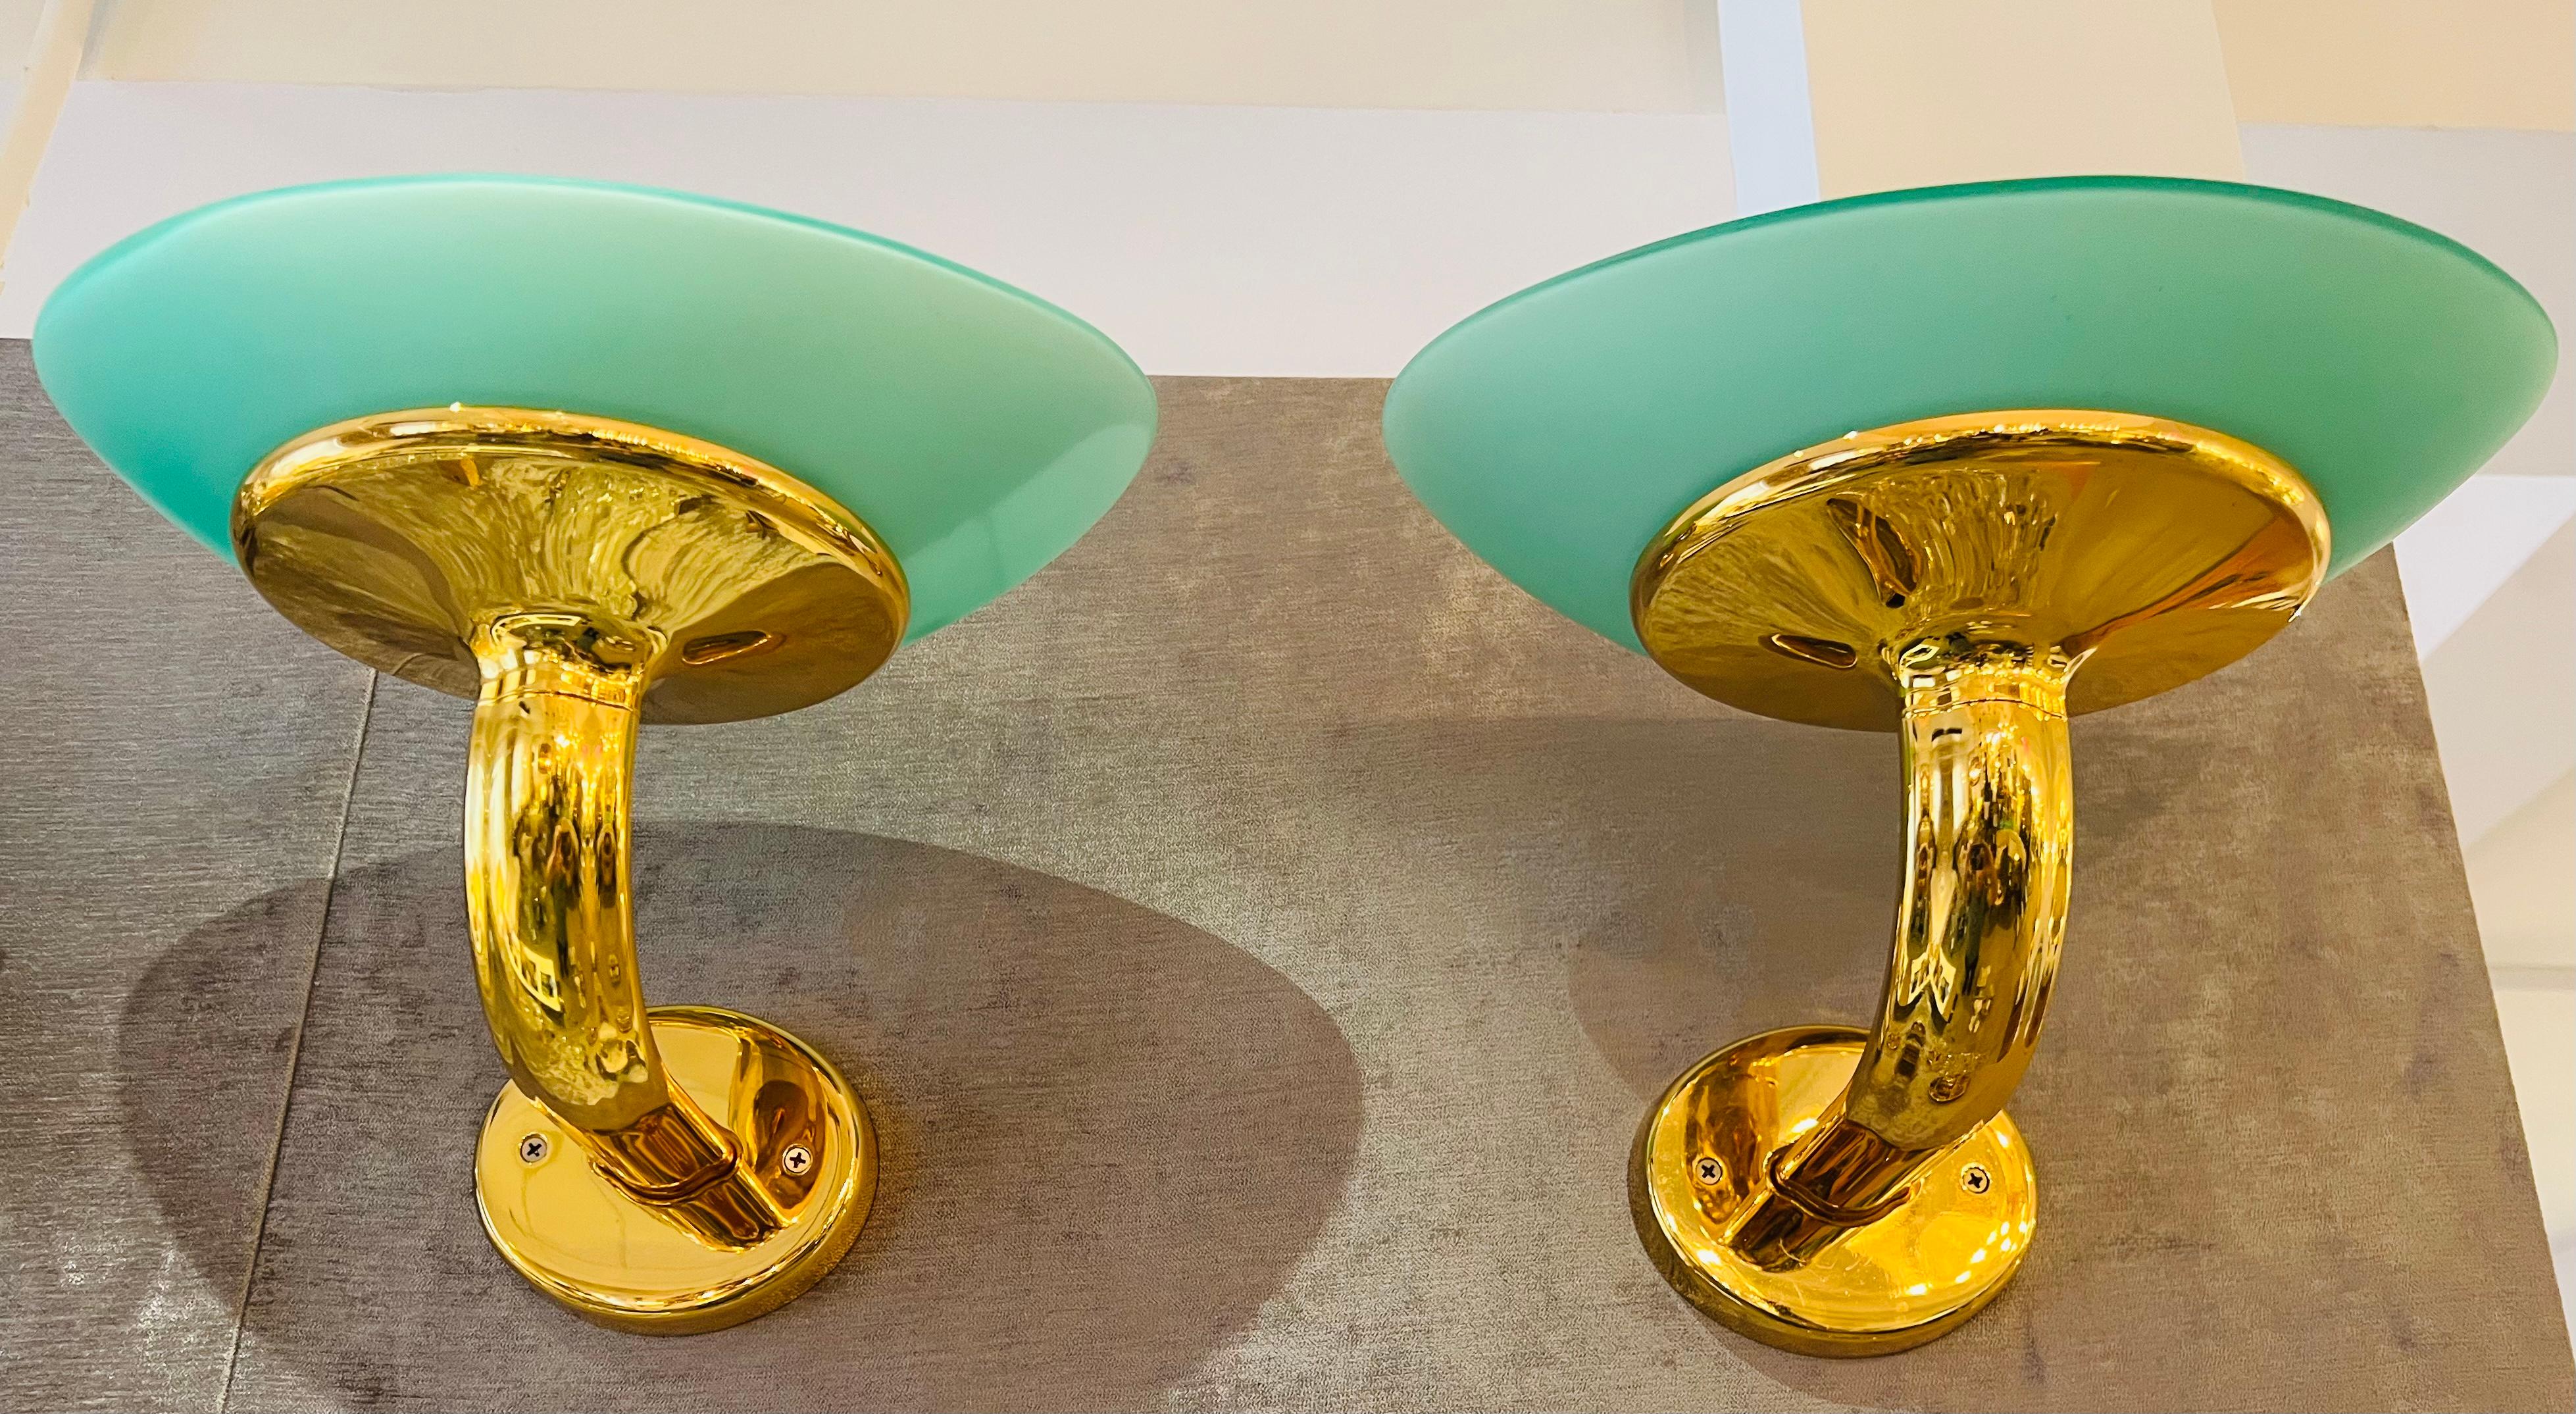 A pair of large gold plated luxurious 1980s wall lamps with green sea foam elliptical glass shades by Fratelli Martini. Great condition.